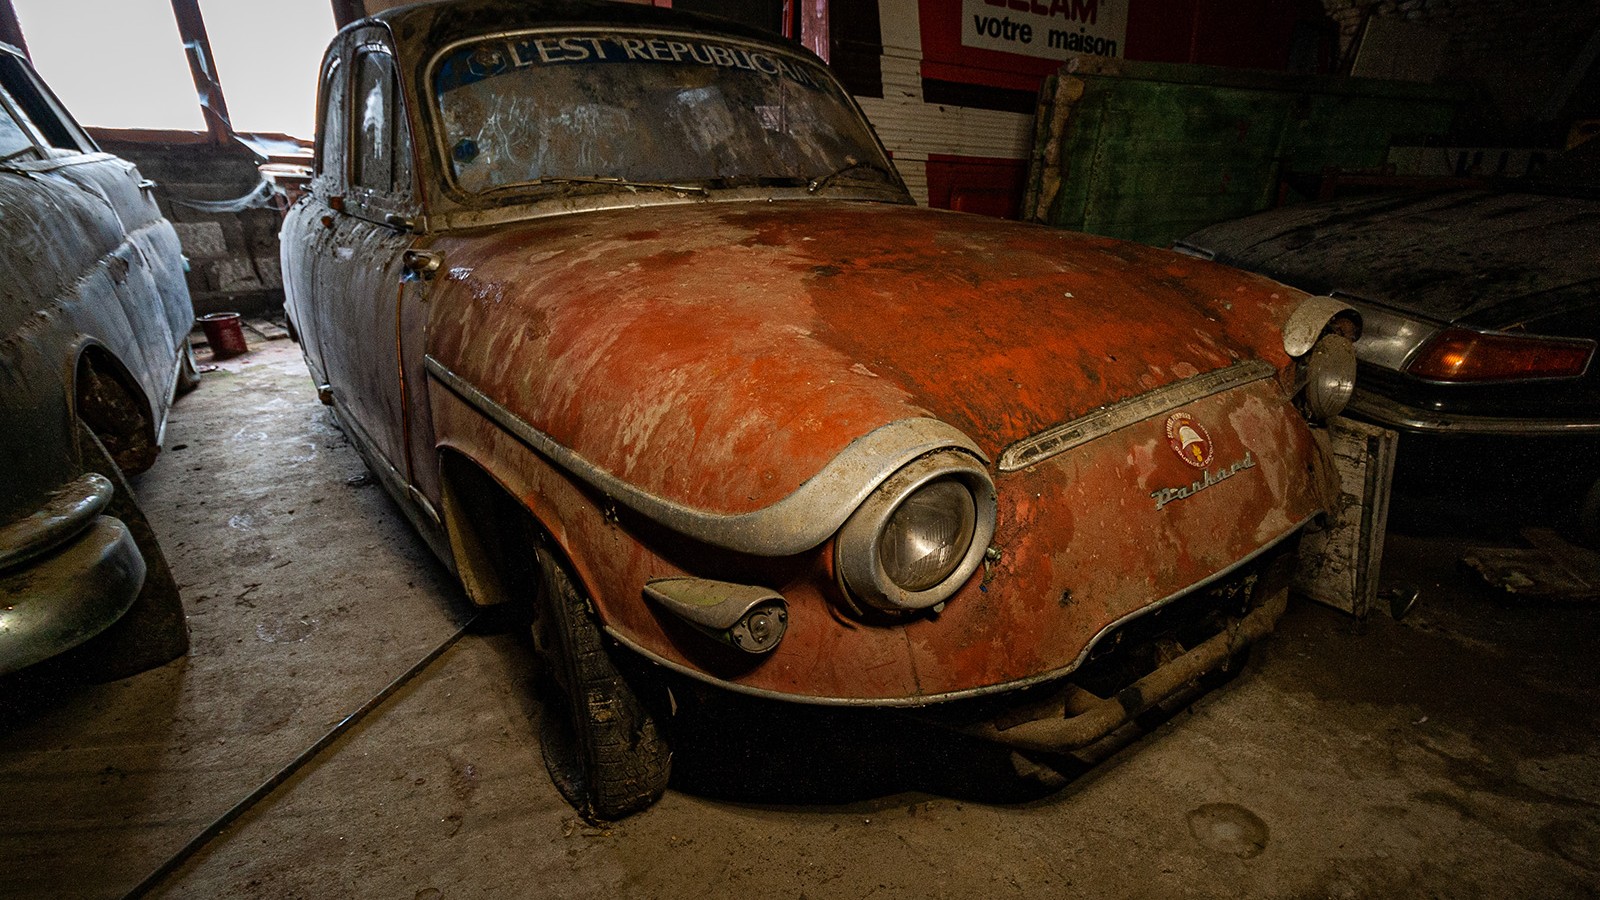 A Panhard project